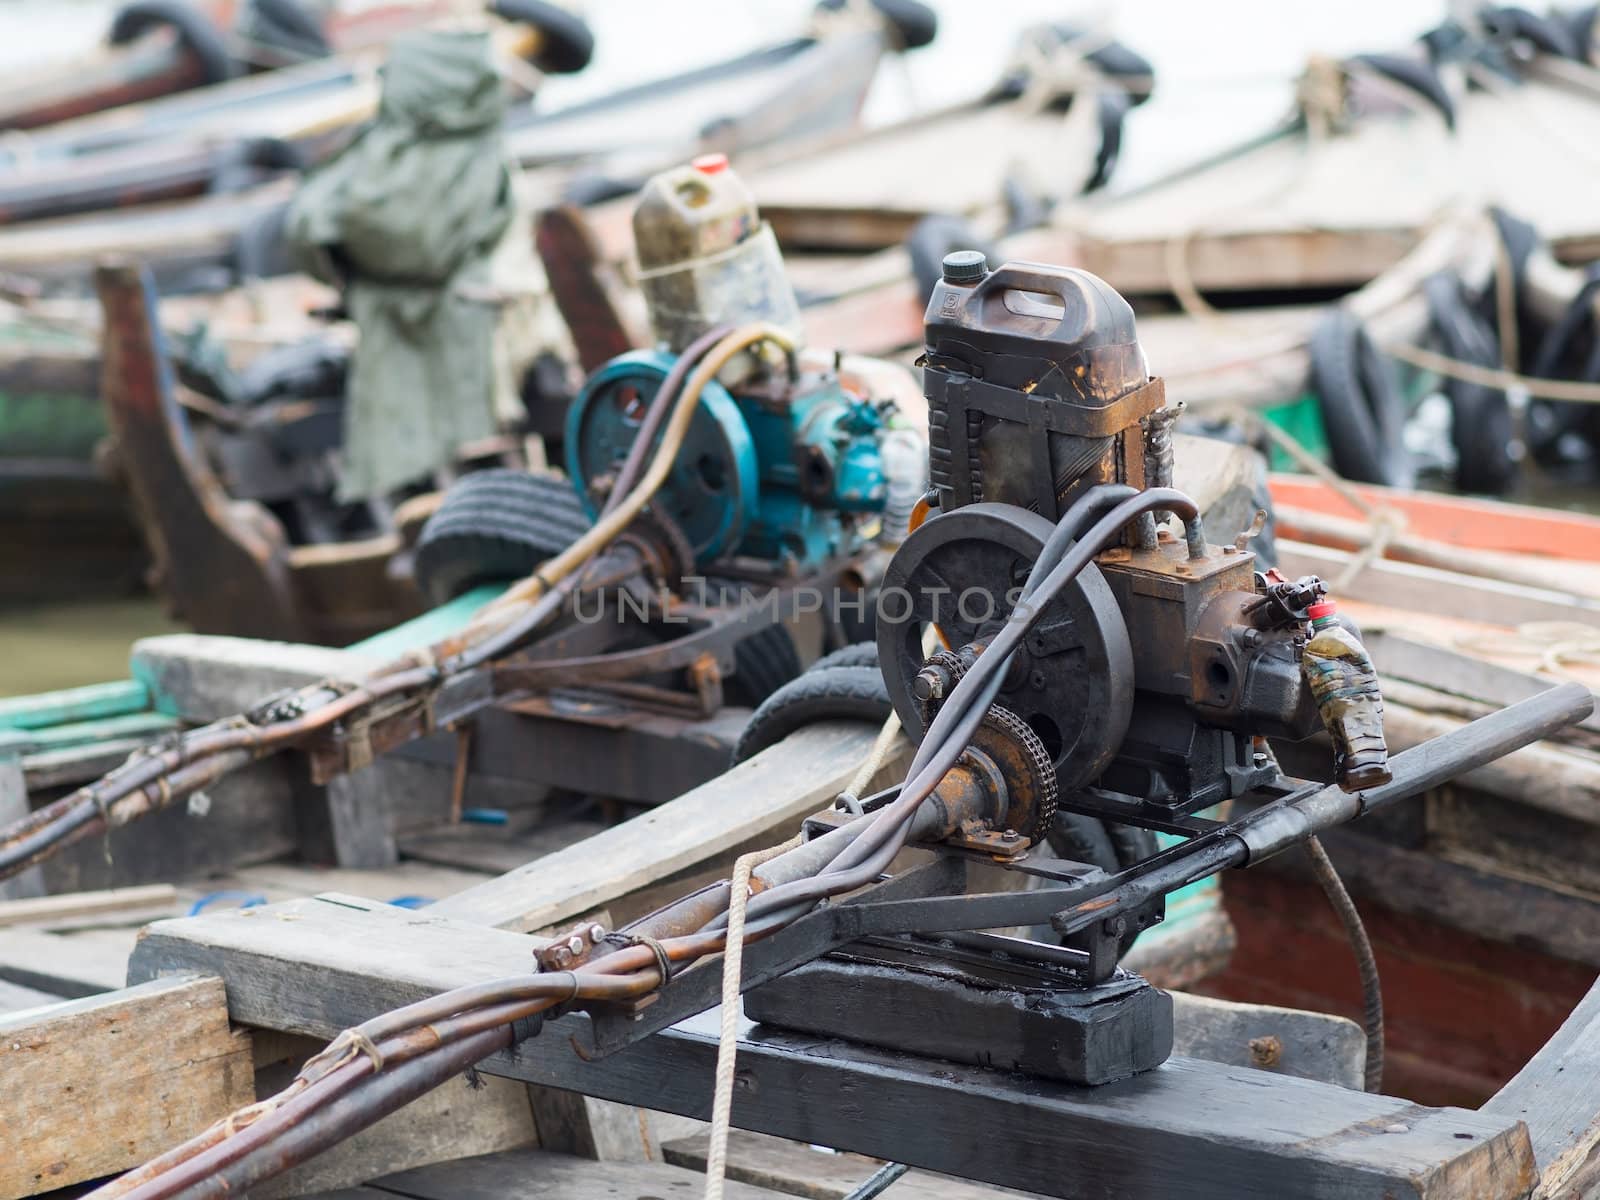 Primitive boat engines on traditional wooden boats at the harbour of Myeik in southern Myanmar.